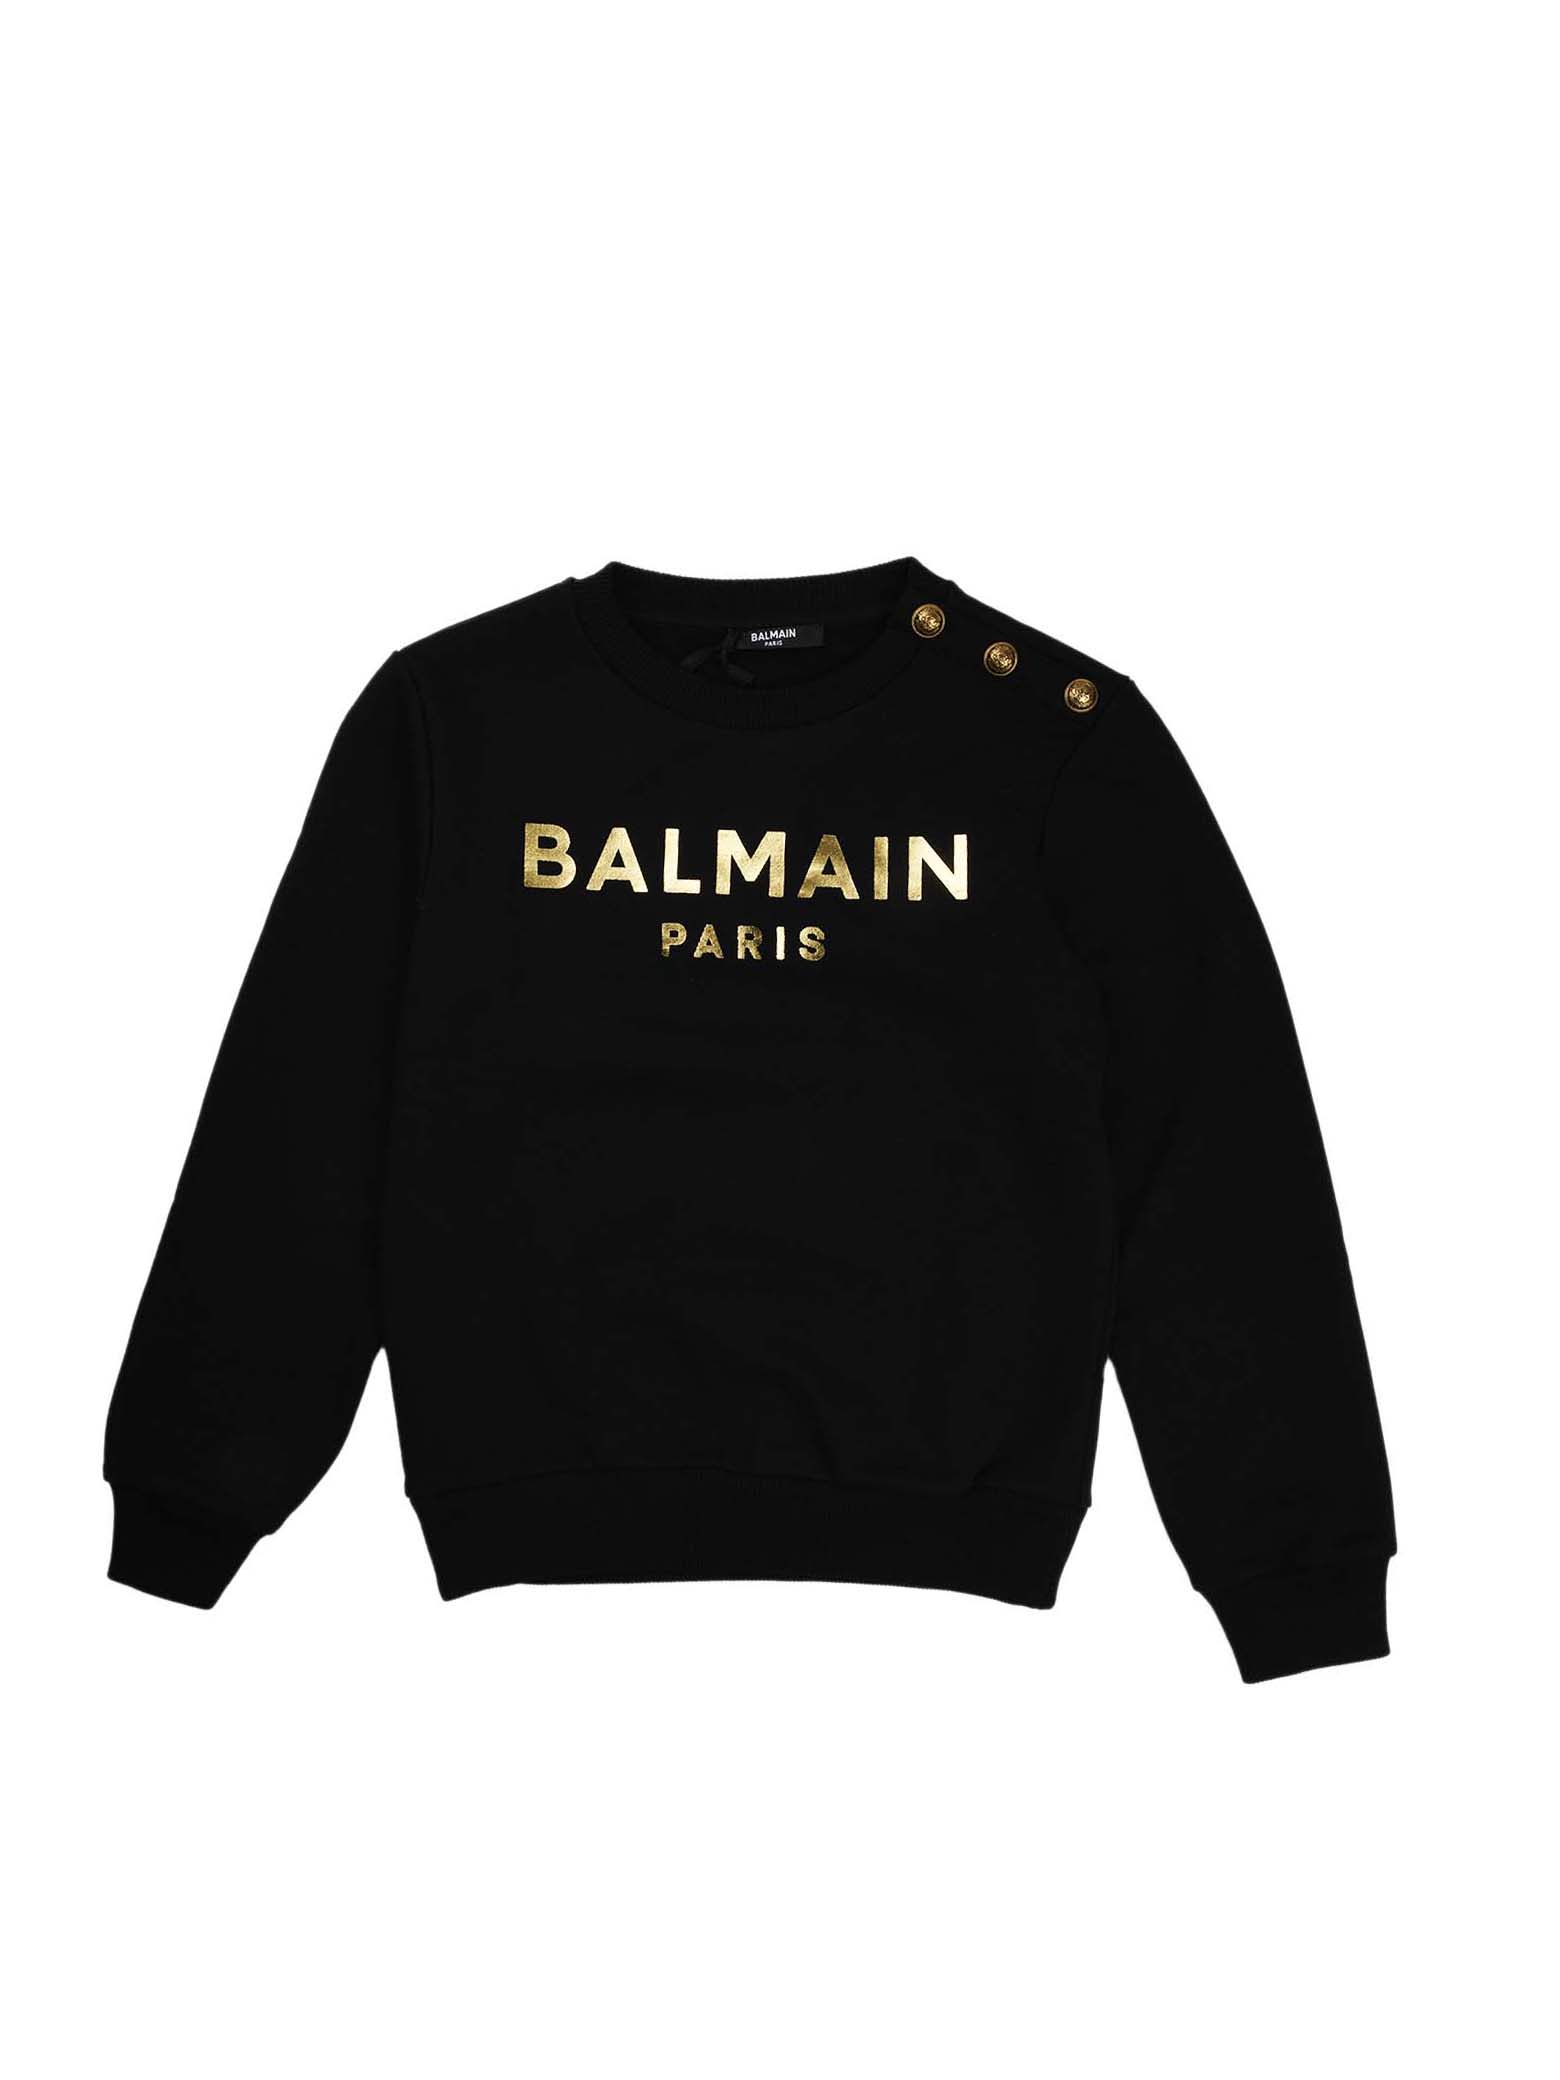 Balmain Black Sweatshirt With Writing And Gold Buttons